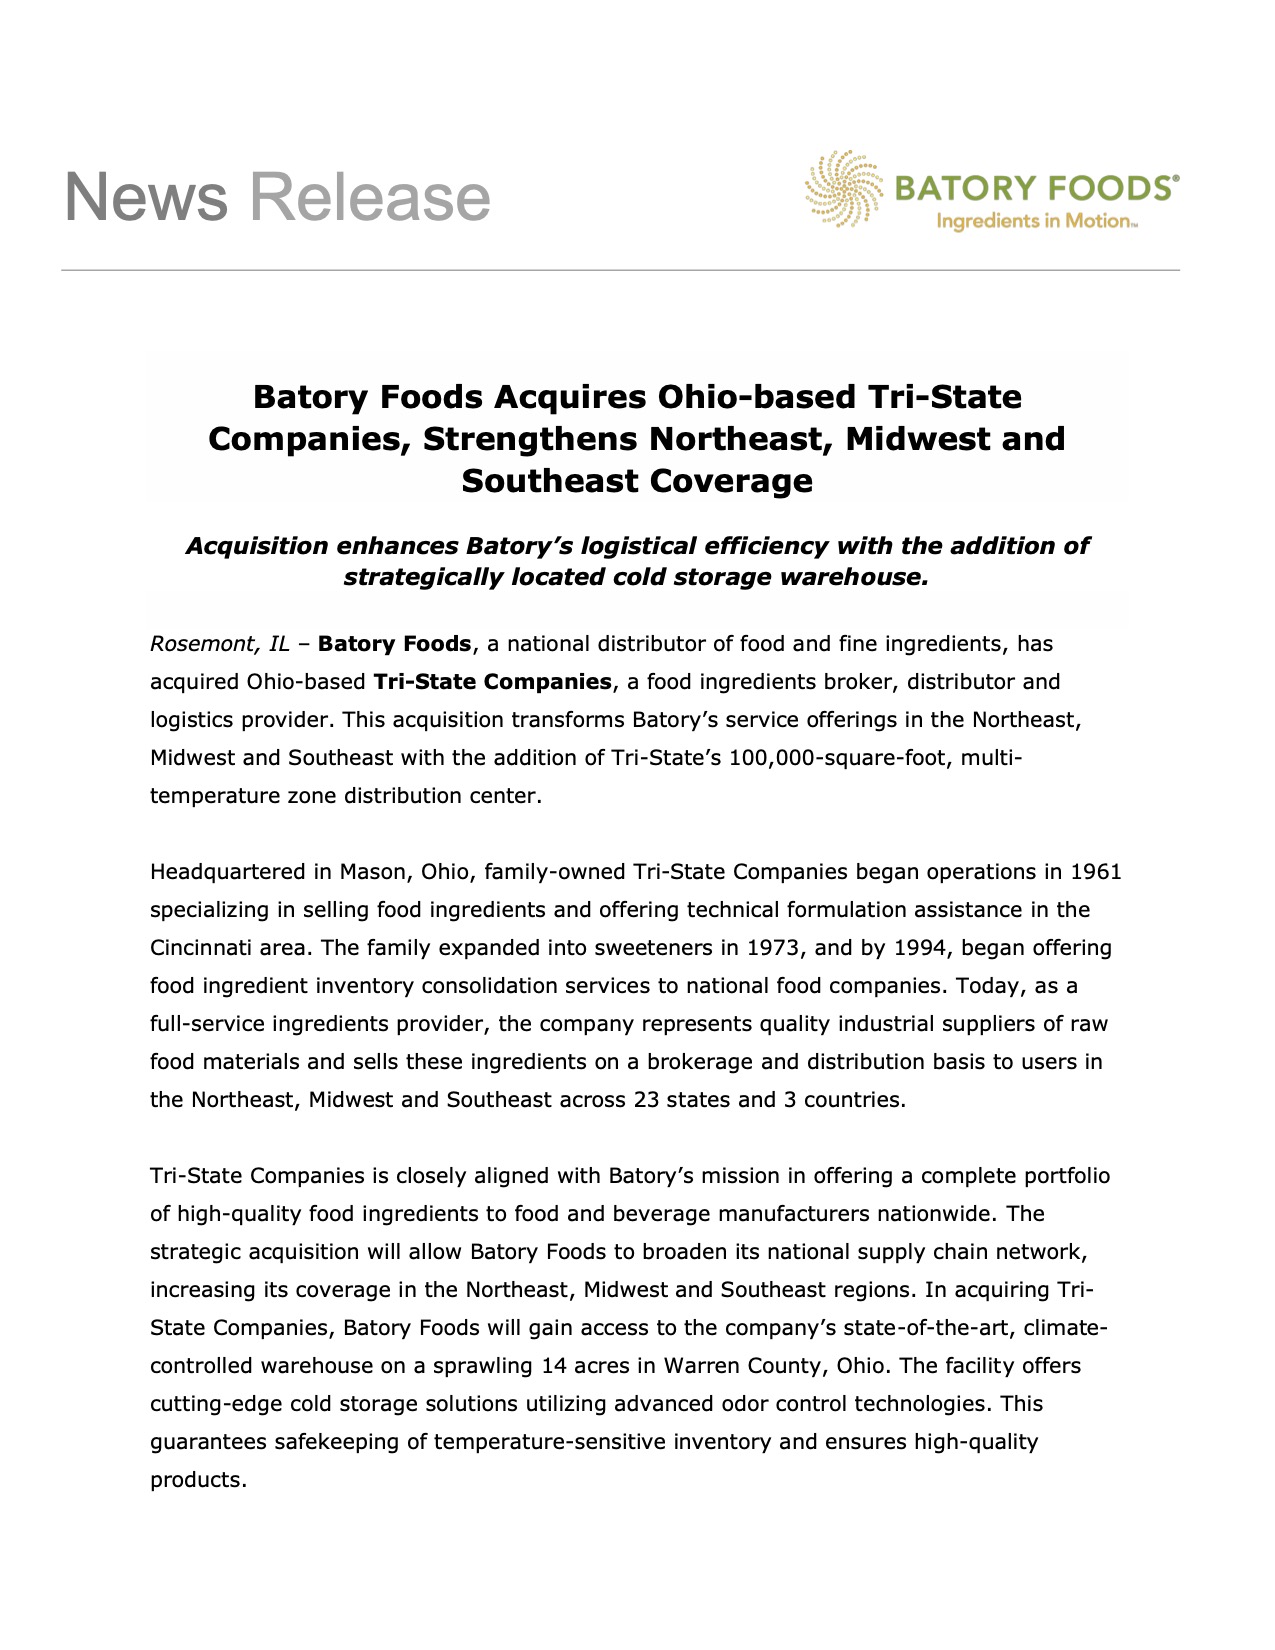 Batory Foods Acquires Try State Companies